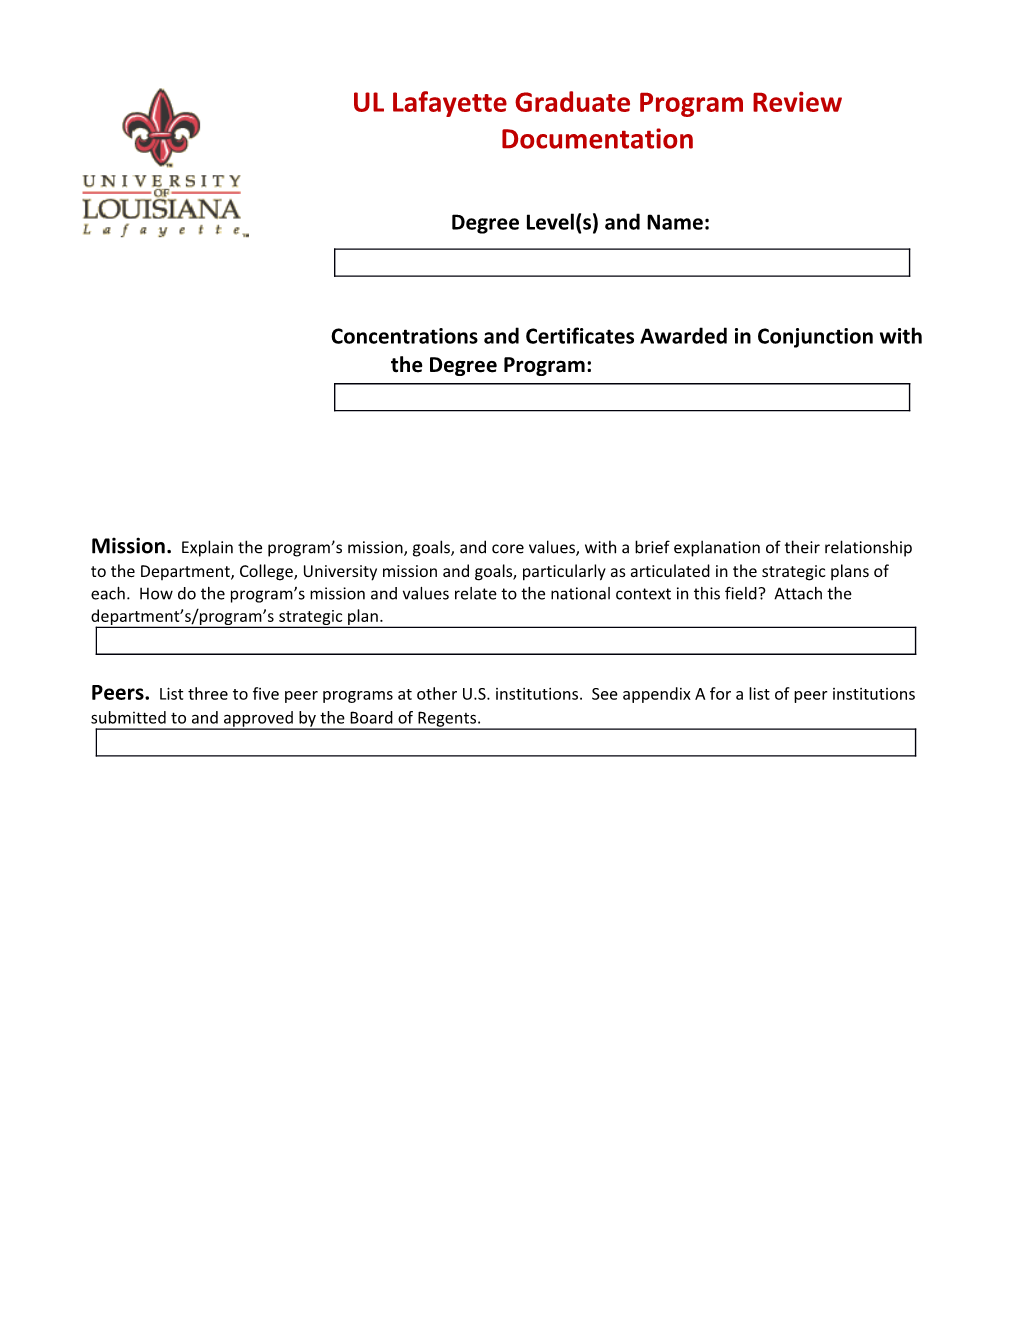 Concentrations and Certificates Awarded in Conjunction with the Degree Program